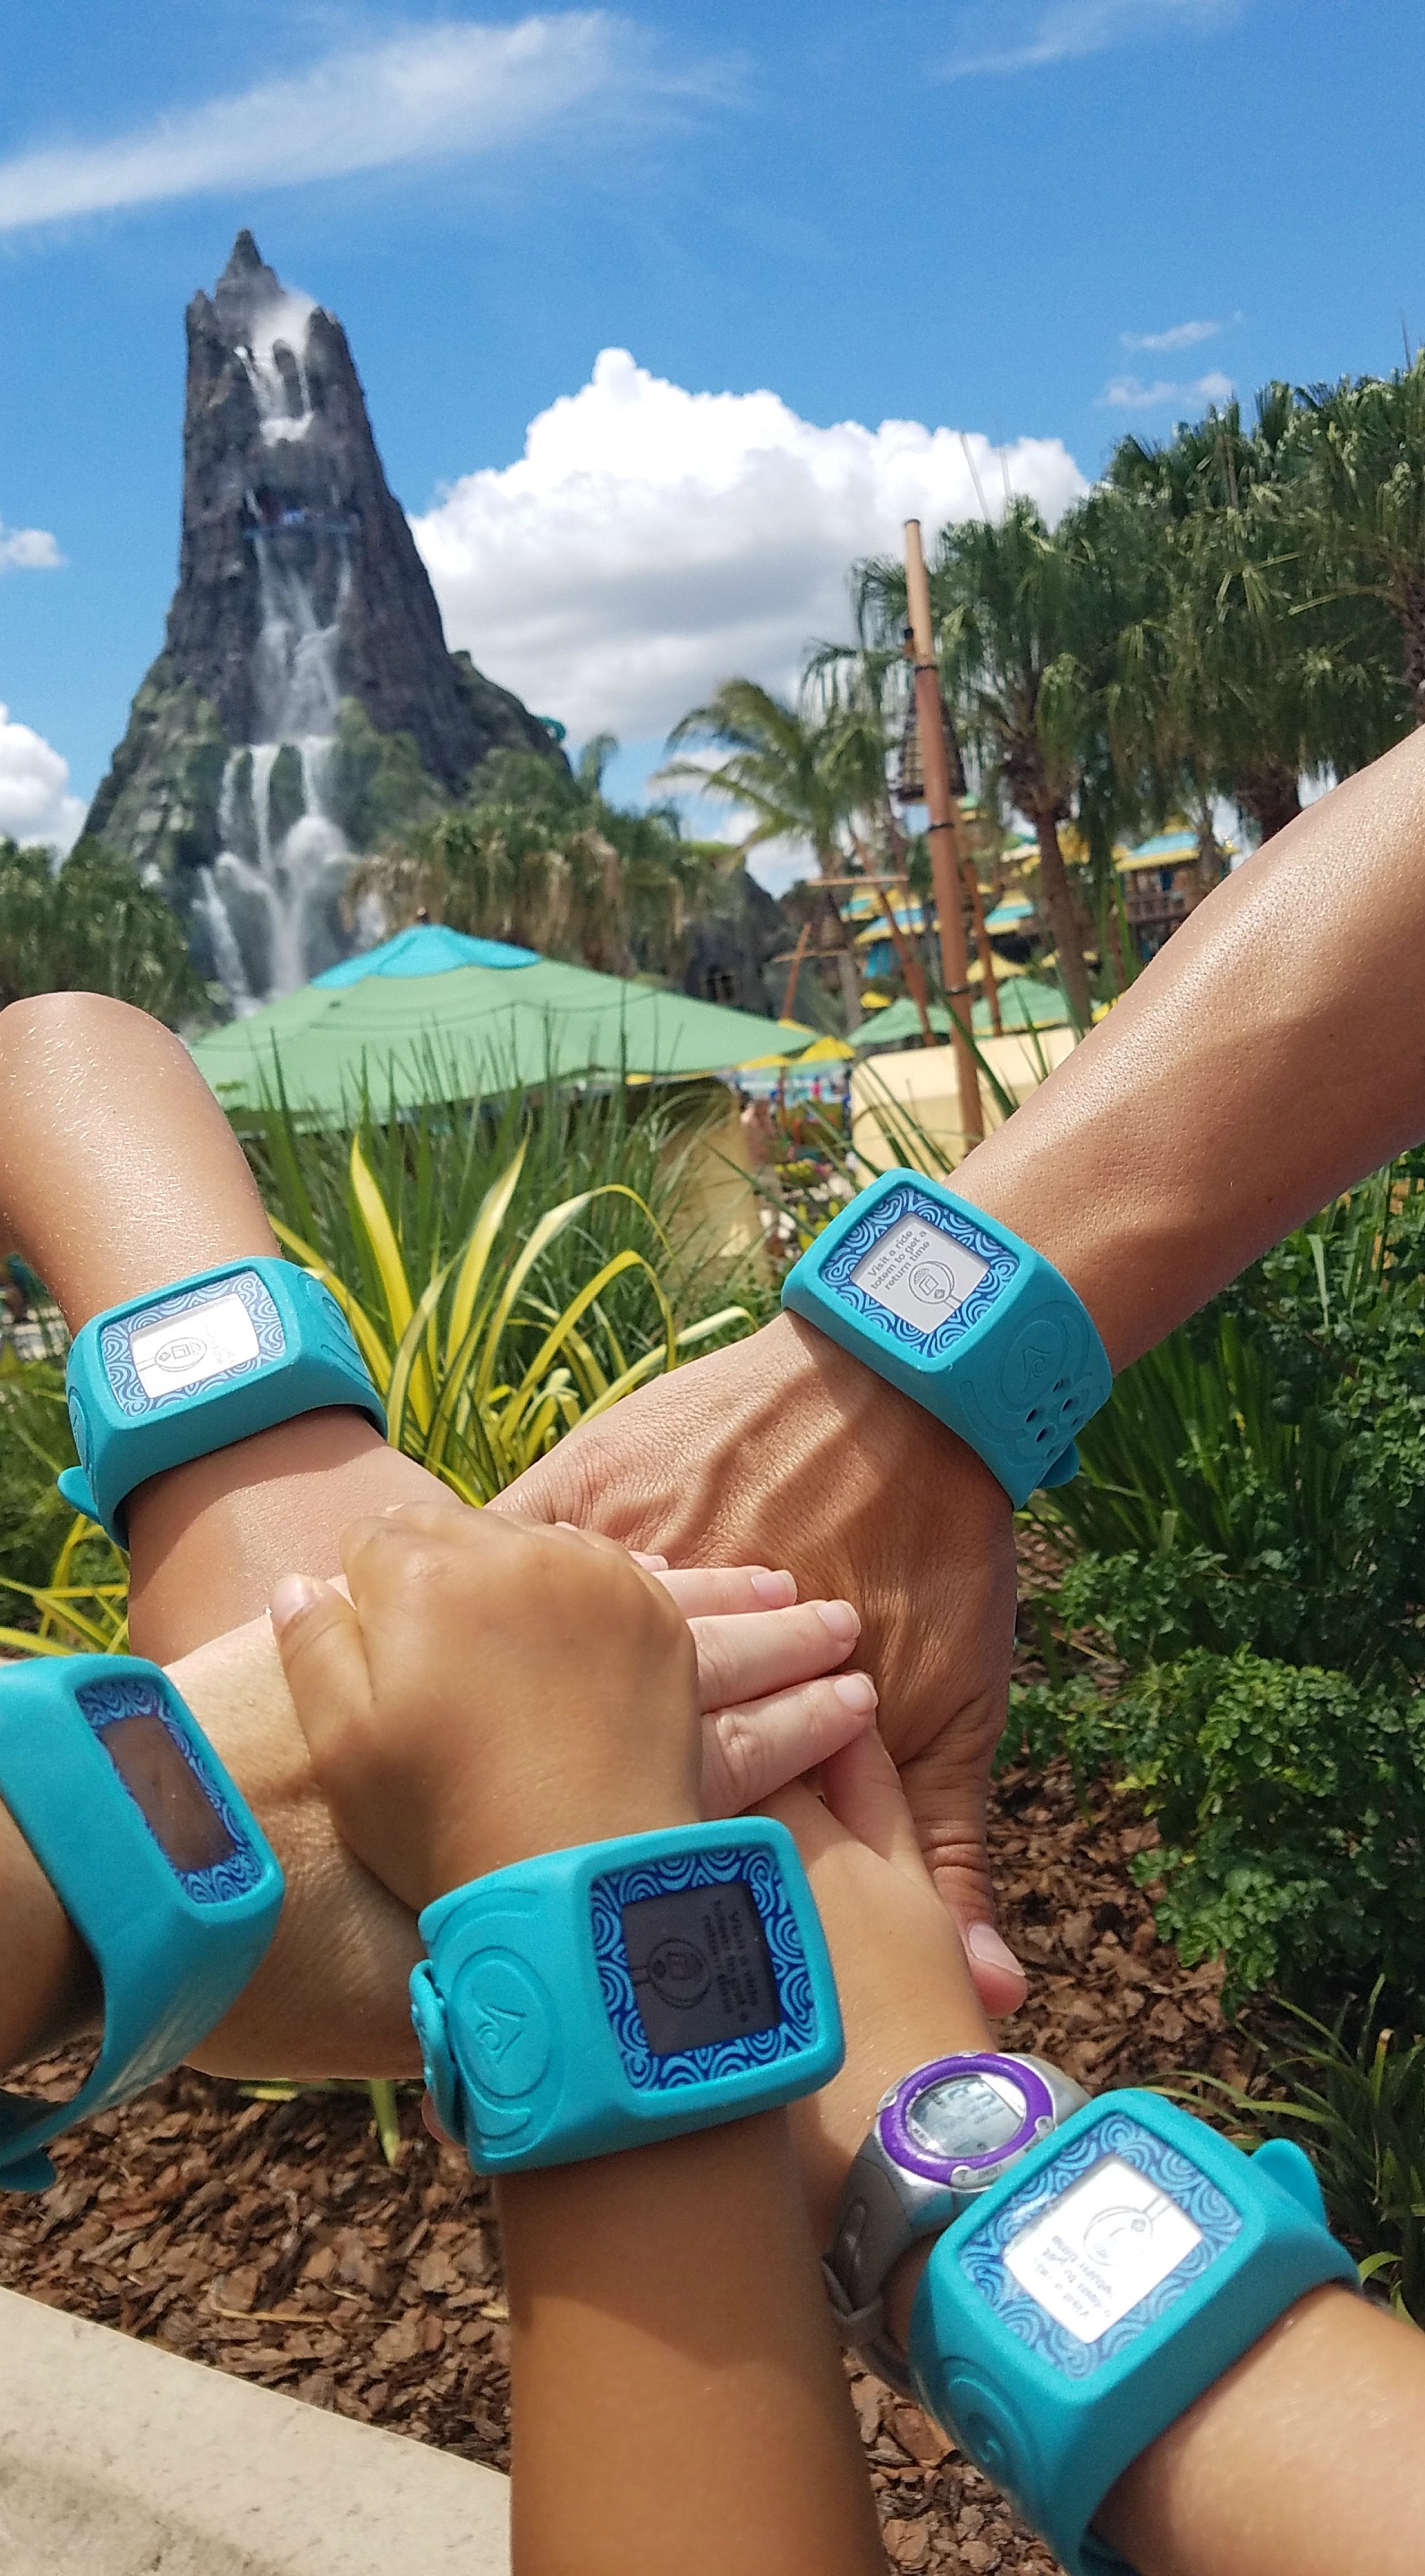 how to use a tapu tapu at volcano bay